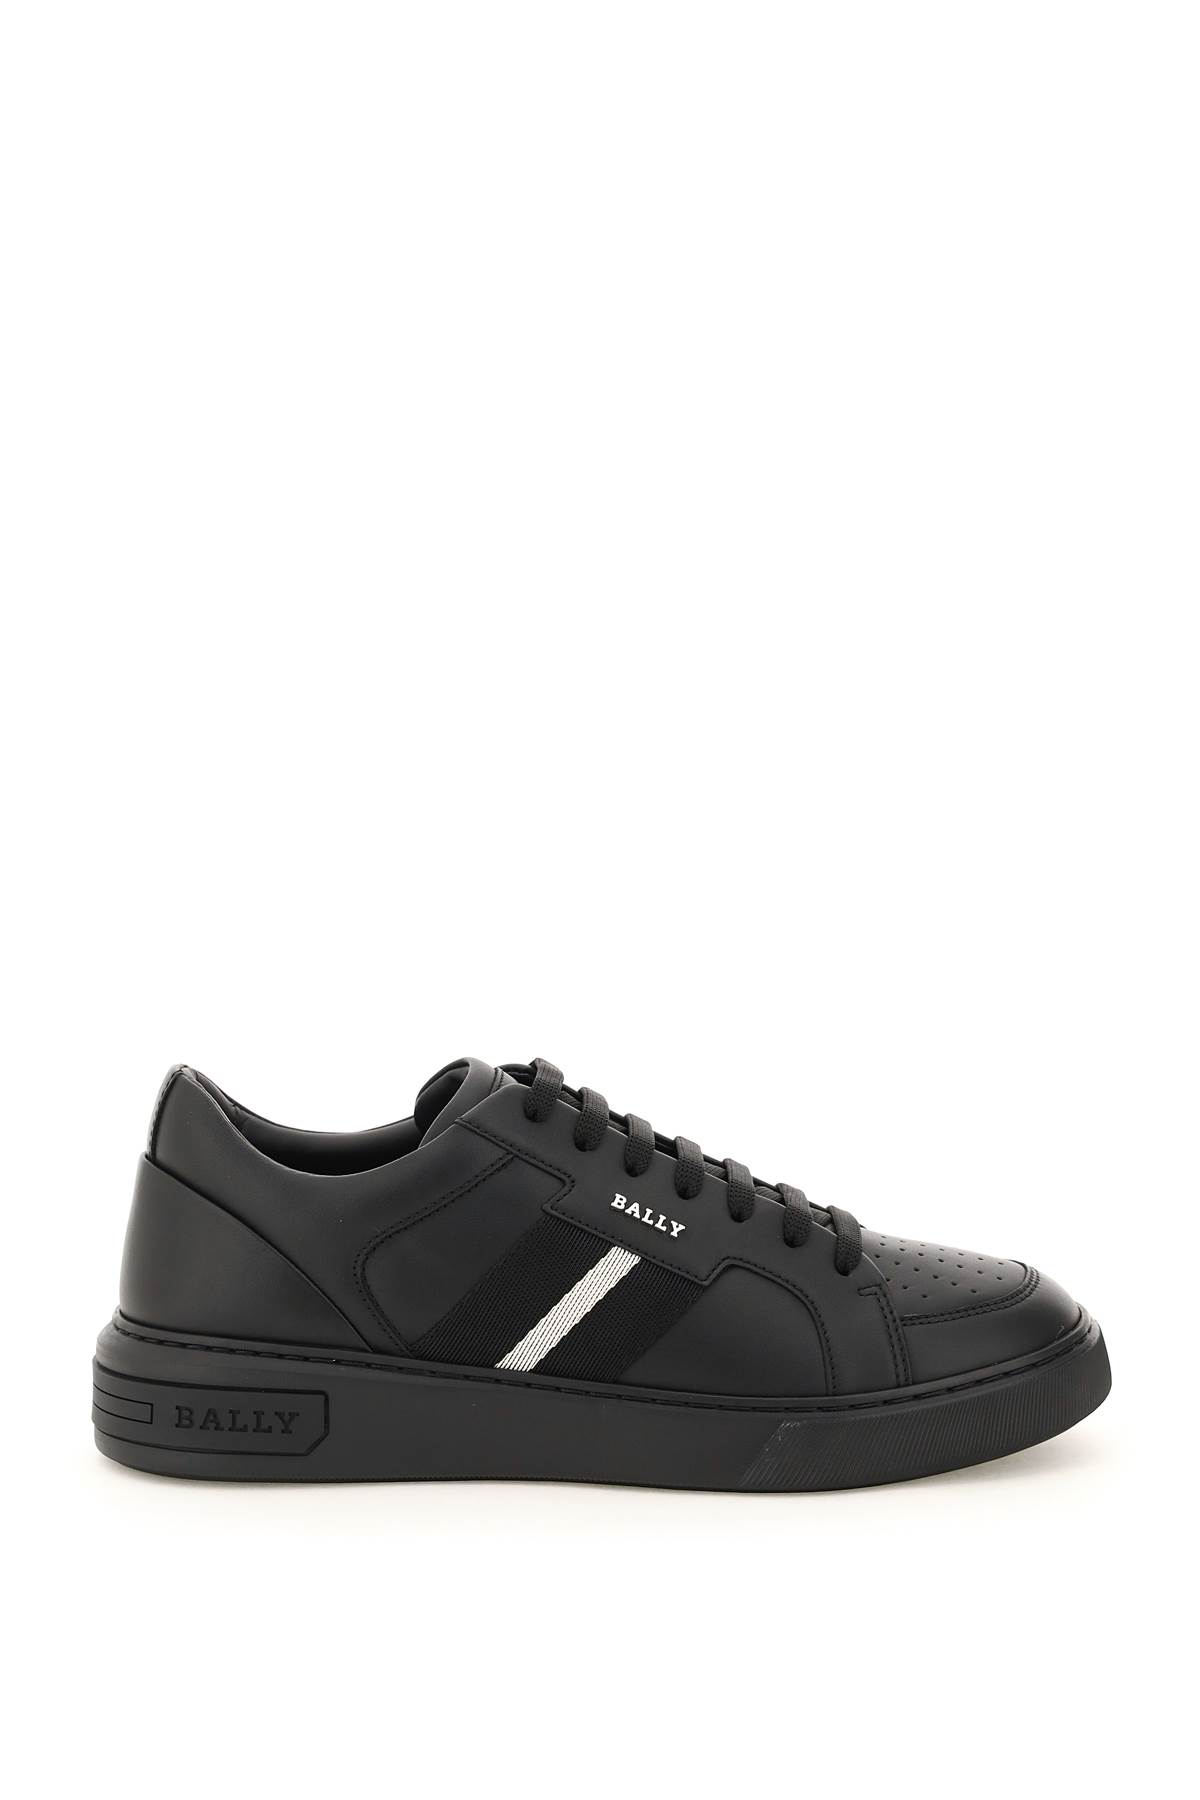 Bally Moony Leather Sneakers